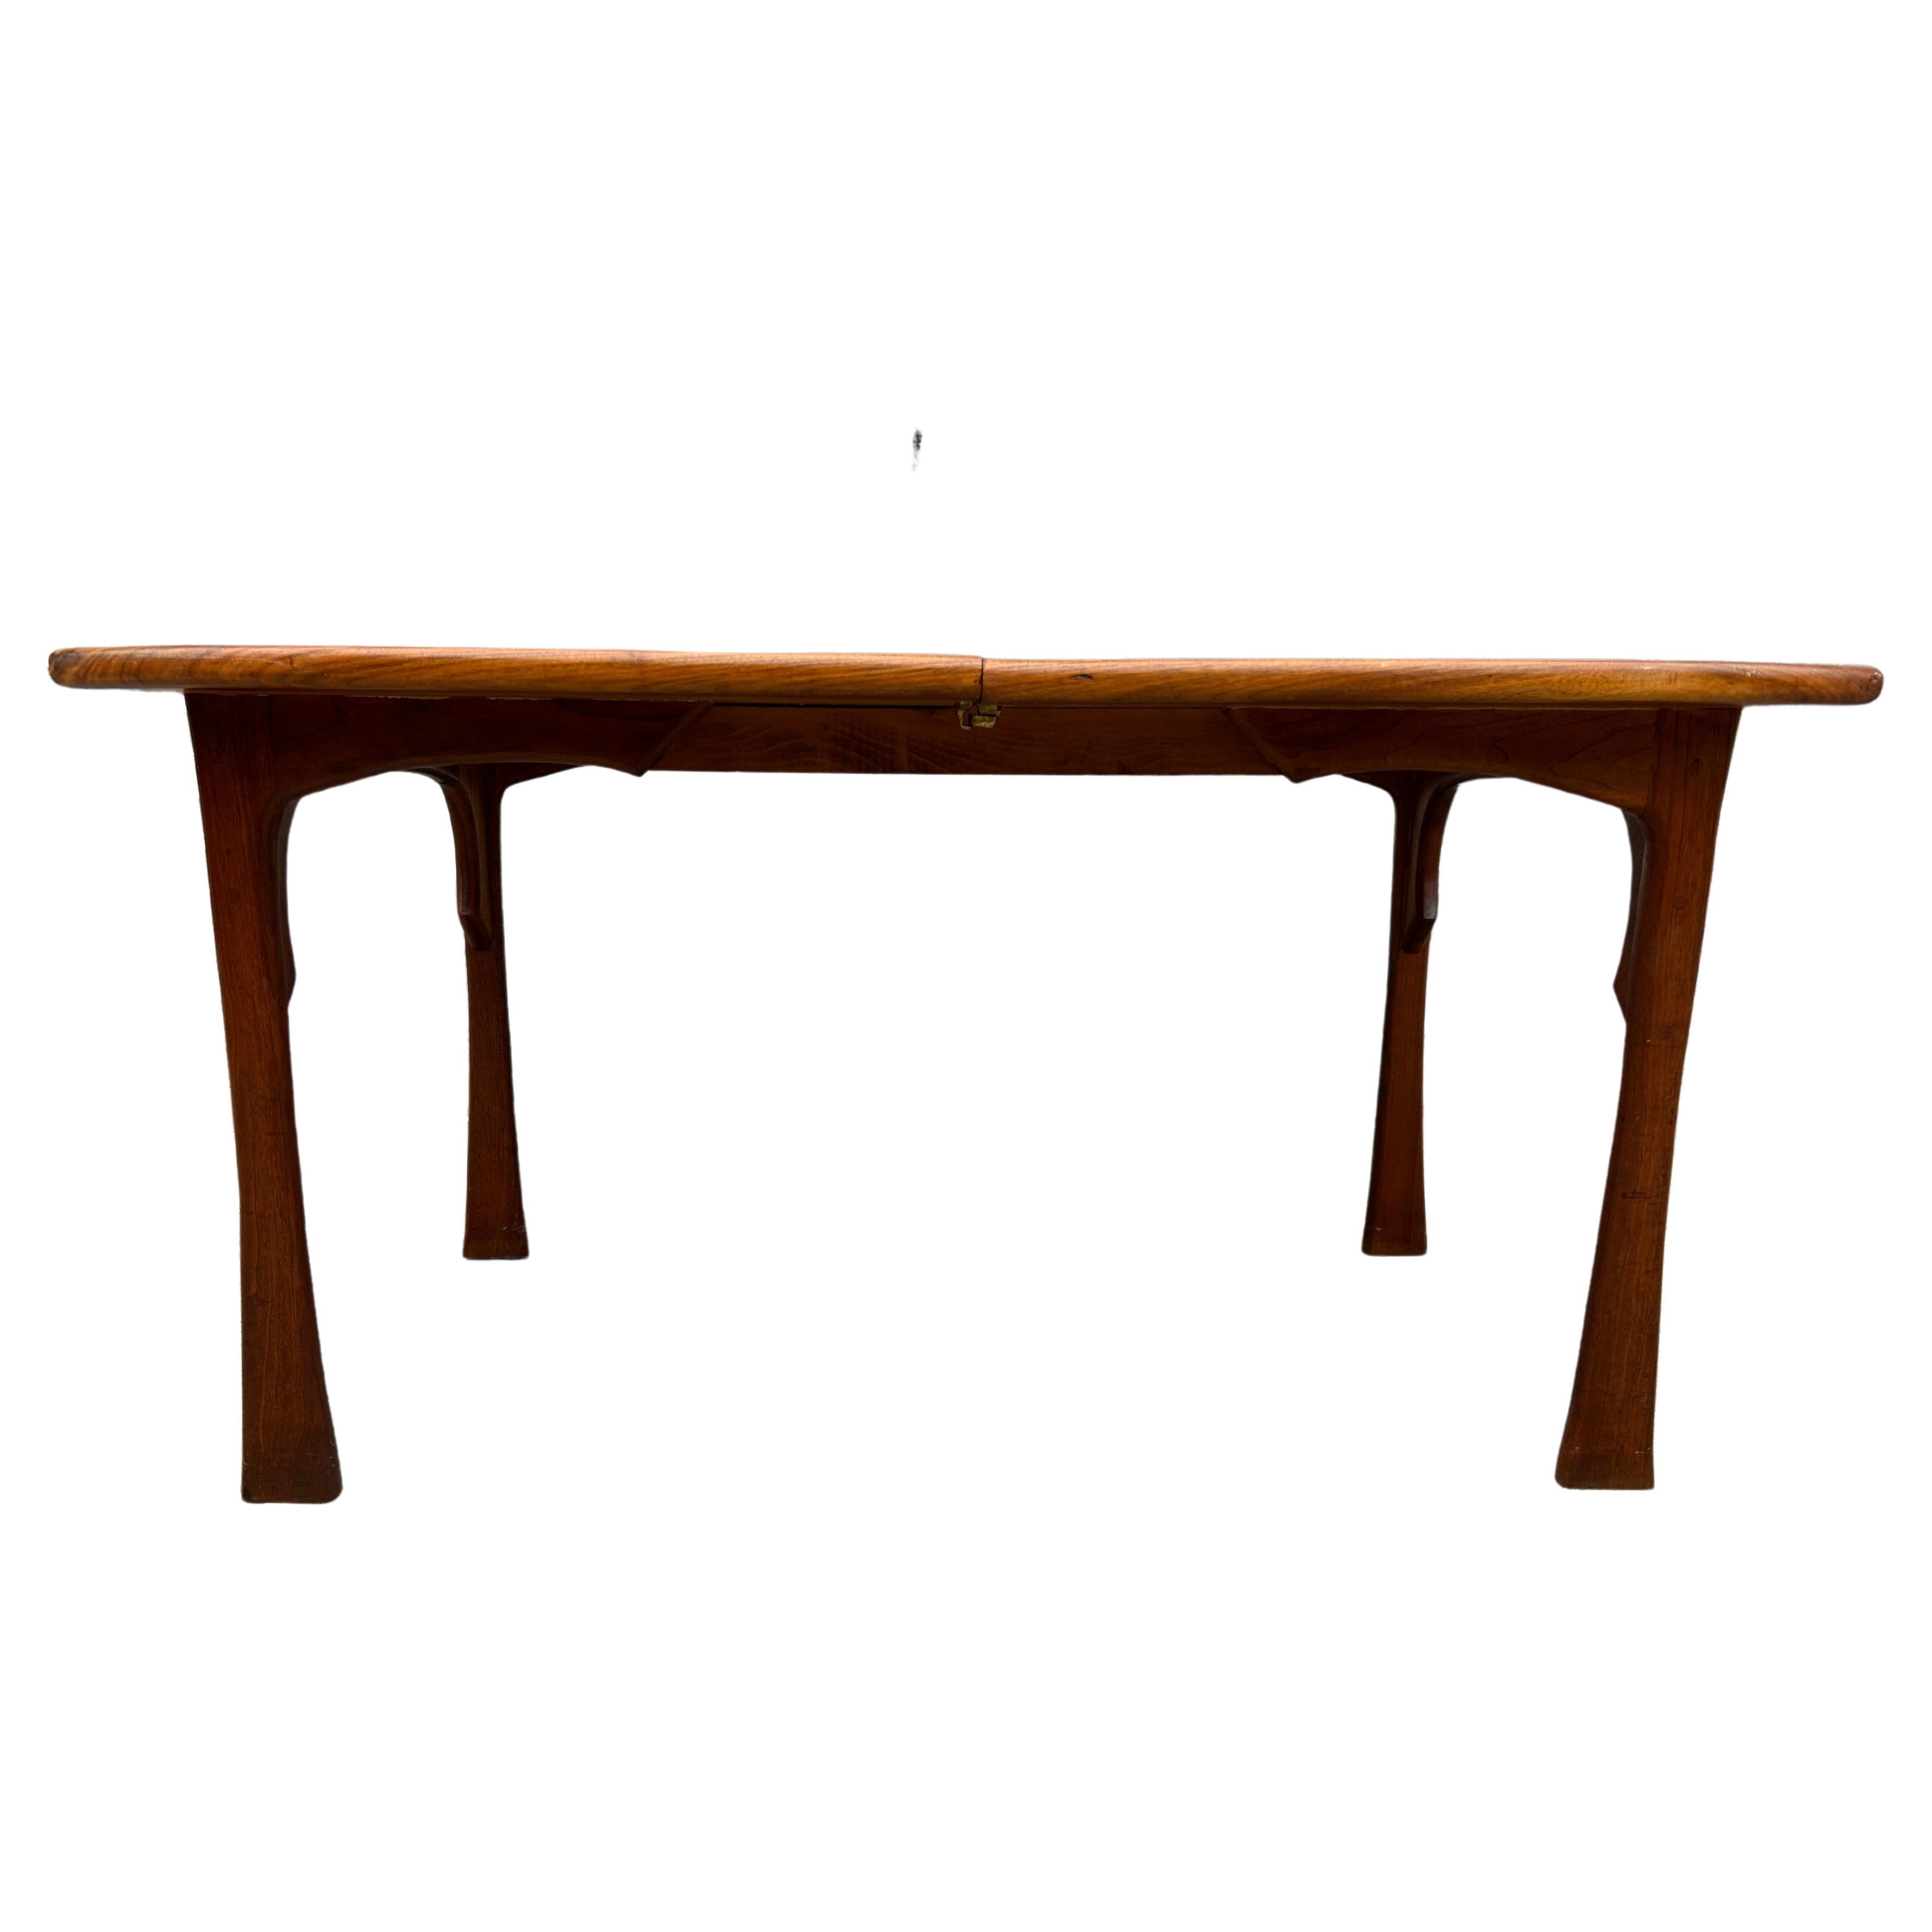 American Studio craft solid beautiful Hardwood & walnut dining table style of Wharton Esherick with 4 carved legs. Curved organic table design made in the style of Wharton Esherick. All Solid Hardwood great vintage condition. Comes with 1 leaf with